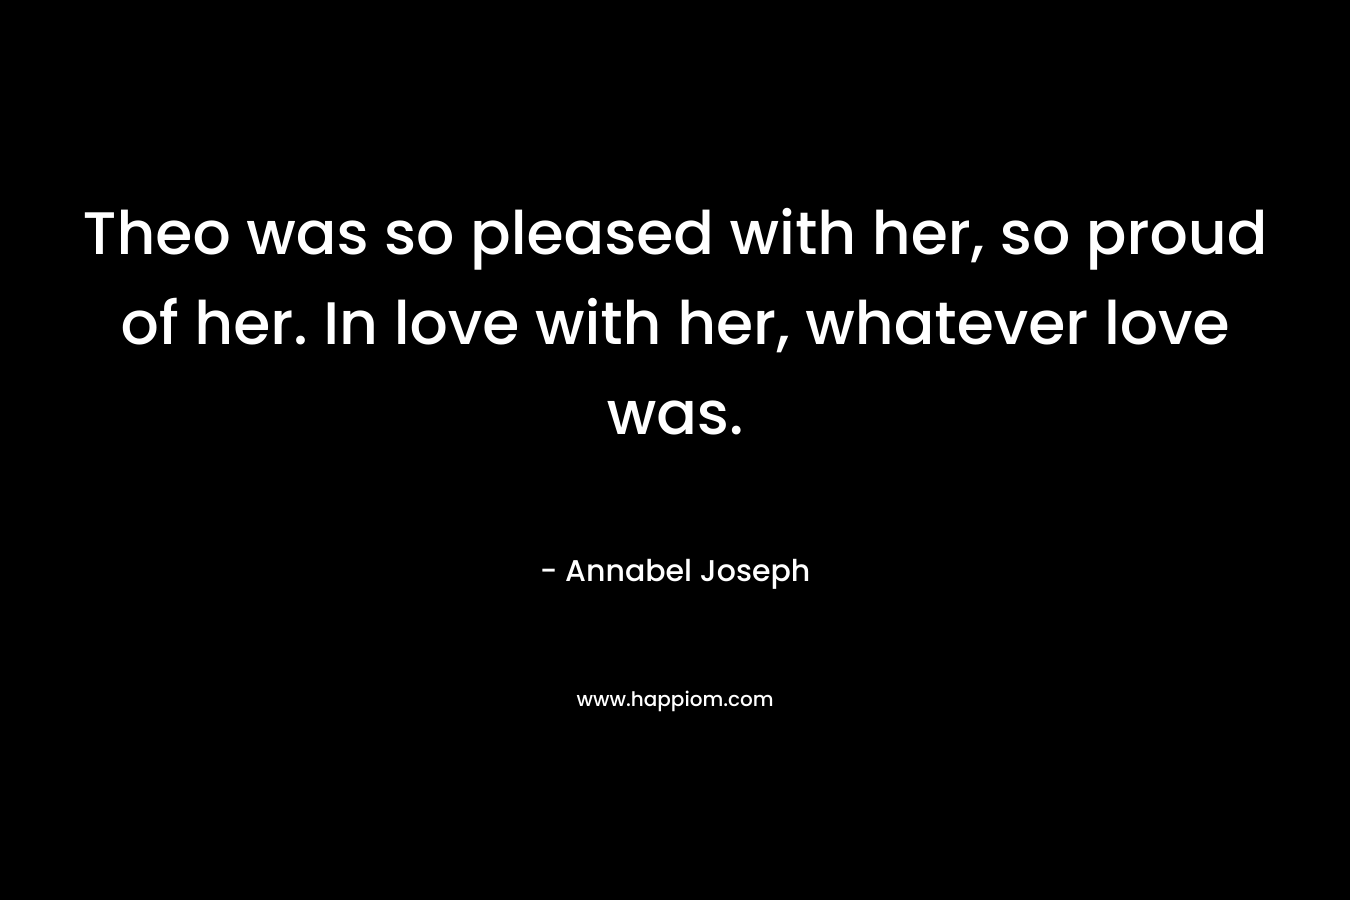 Theo was so pleased with her, so proud of her. In love with her, whatever love was. – Annabel Joseph